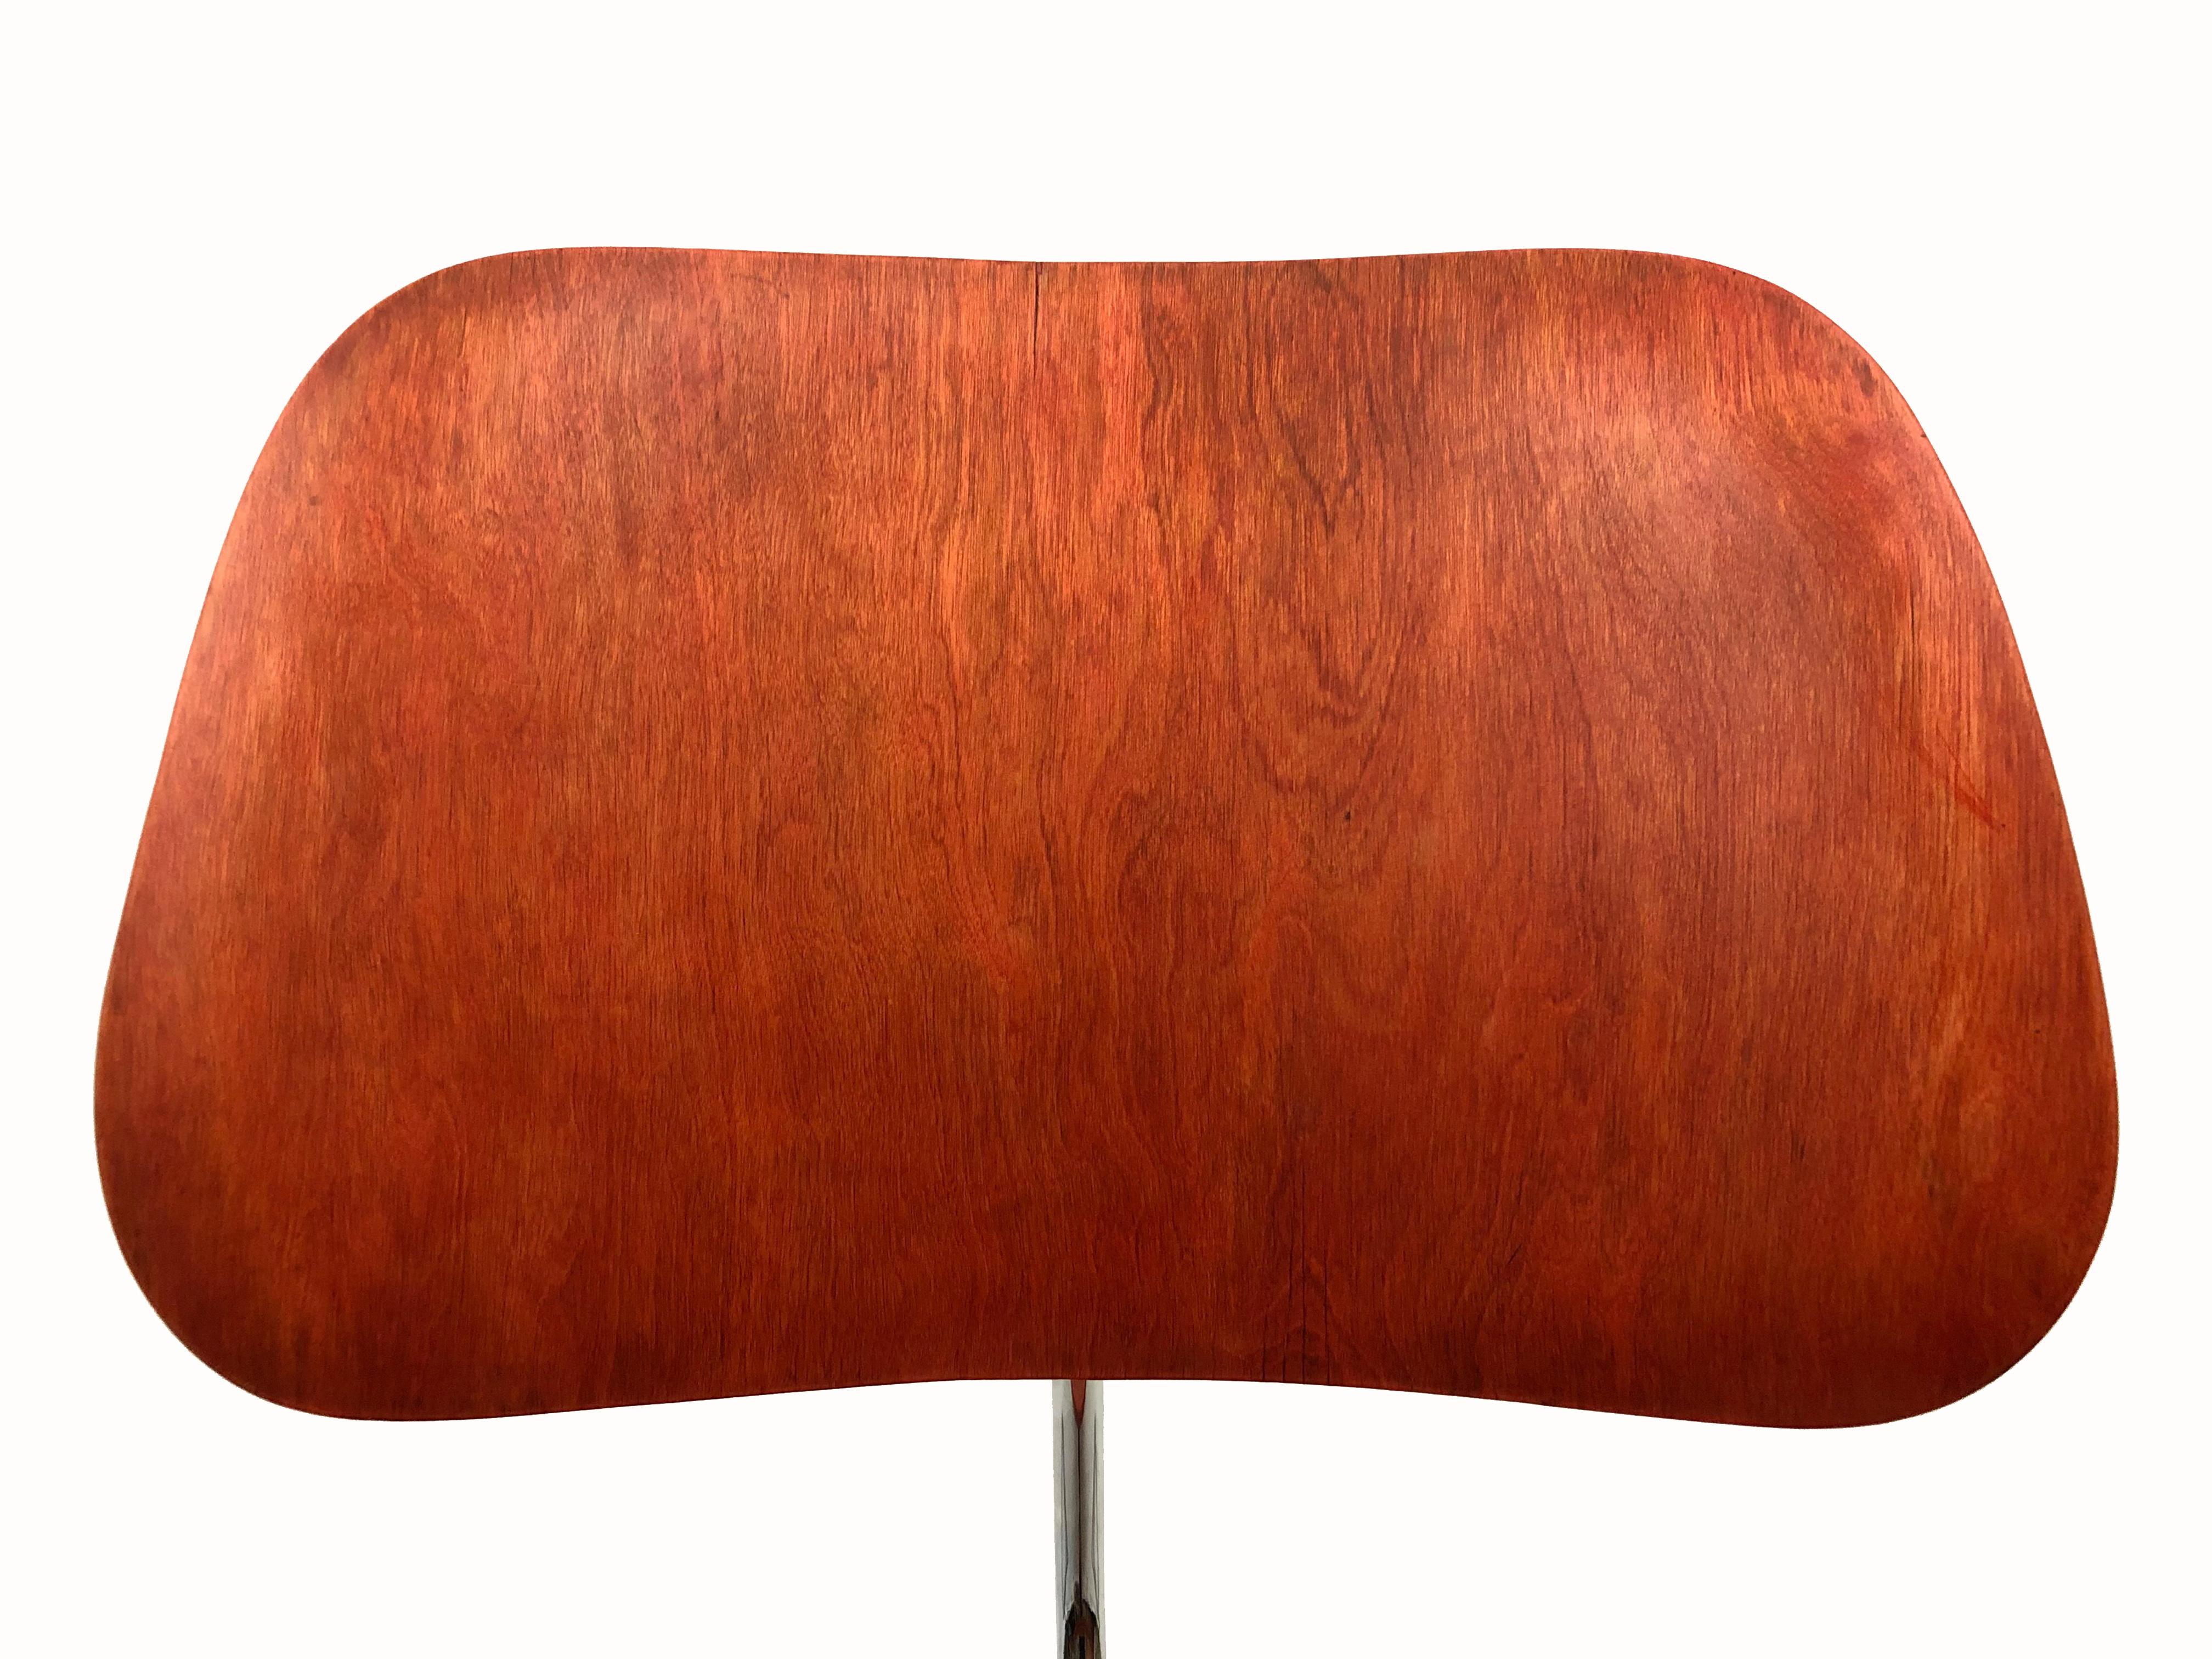 An early edition LCM lounge chair by Charles and Ray Eames for Herman Miller in the Eames' proprietary aniline red finish.